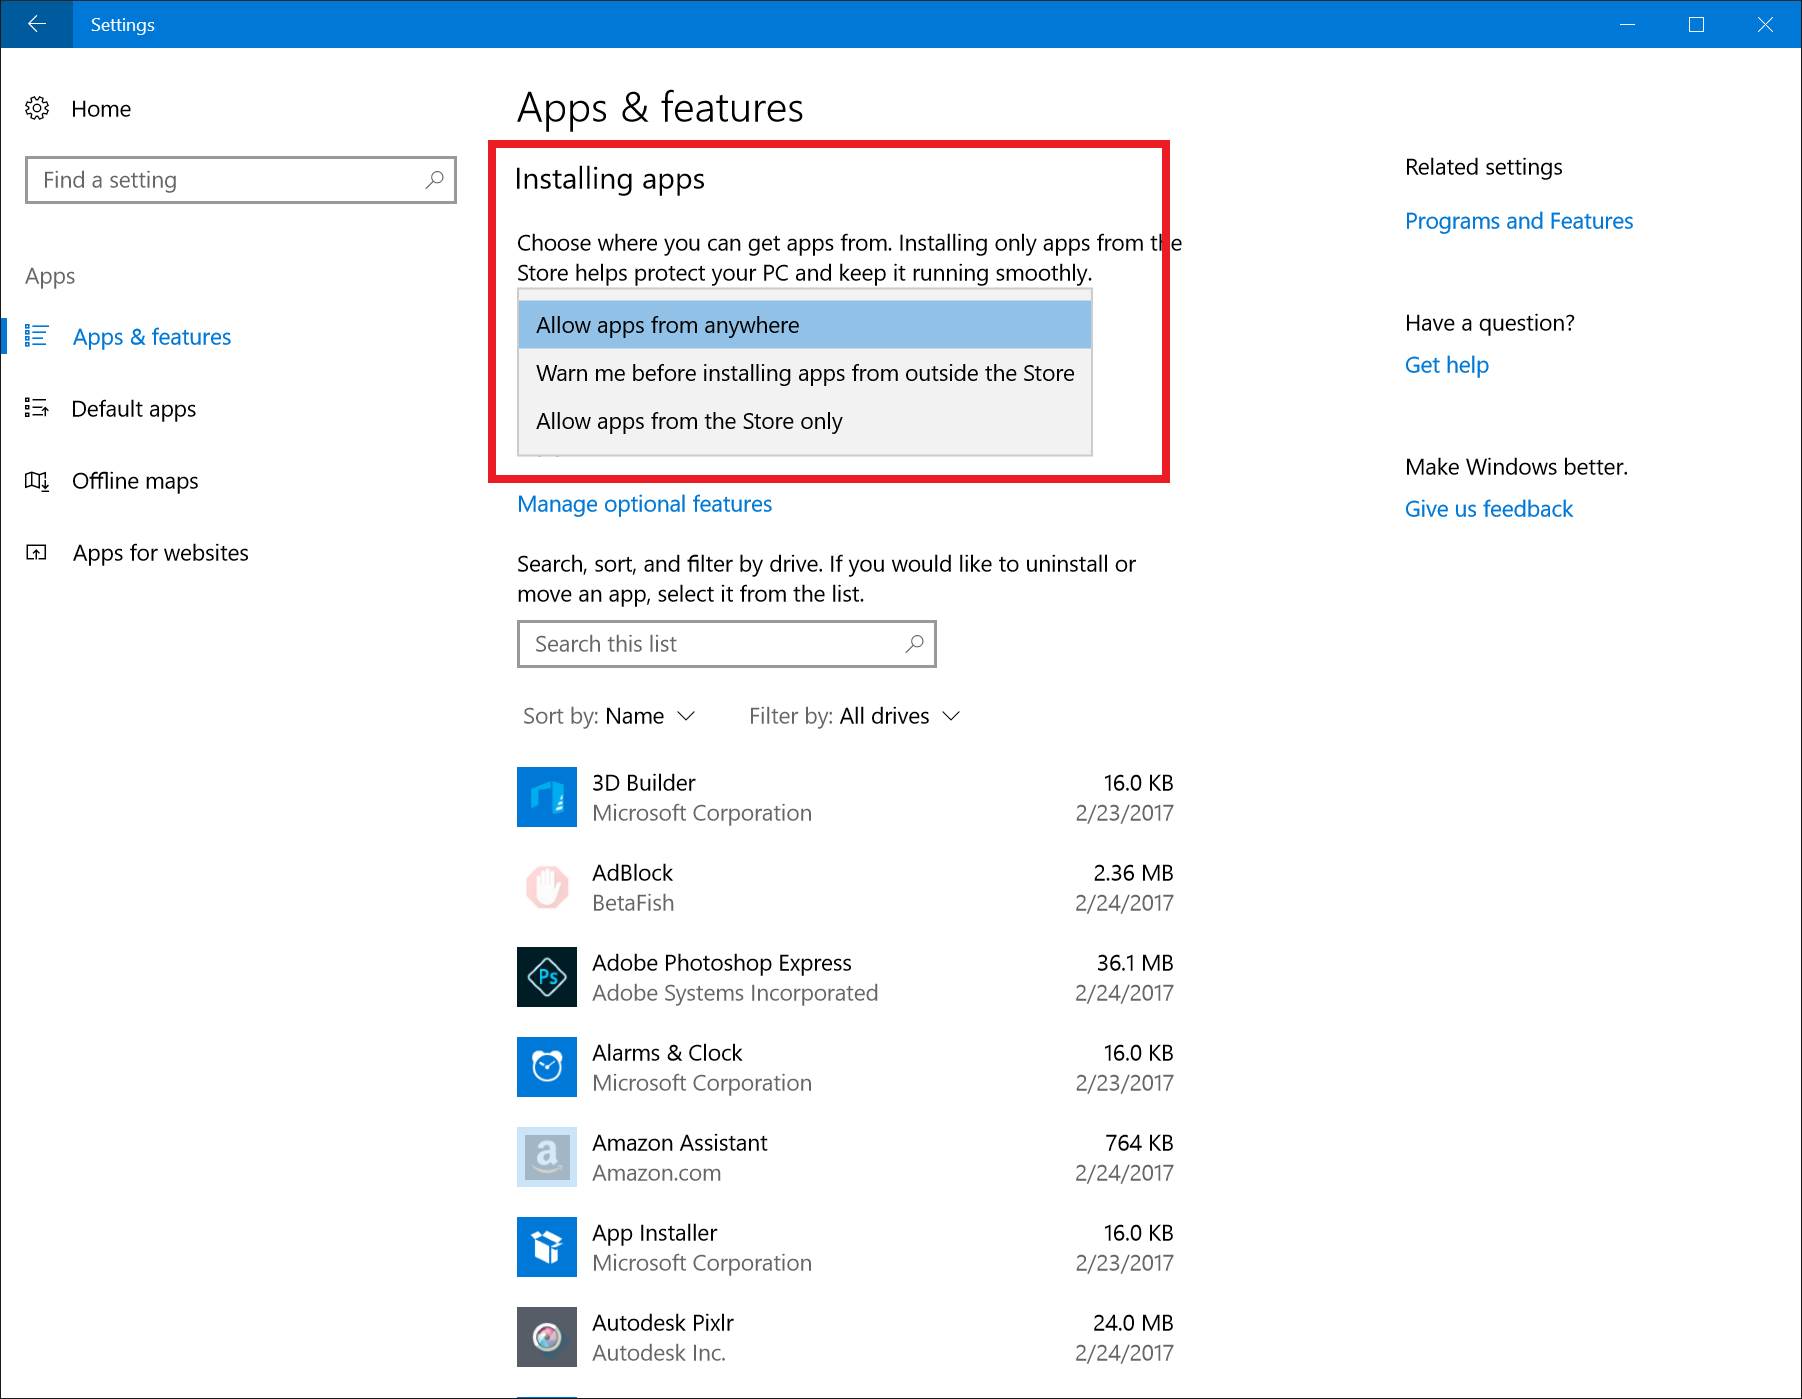 Apple-style app restrictions mooted for Windows - Security - iTnews